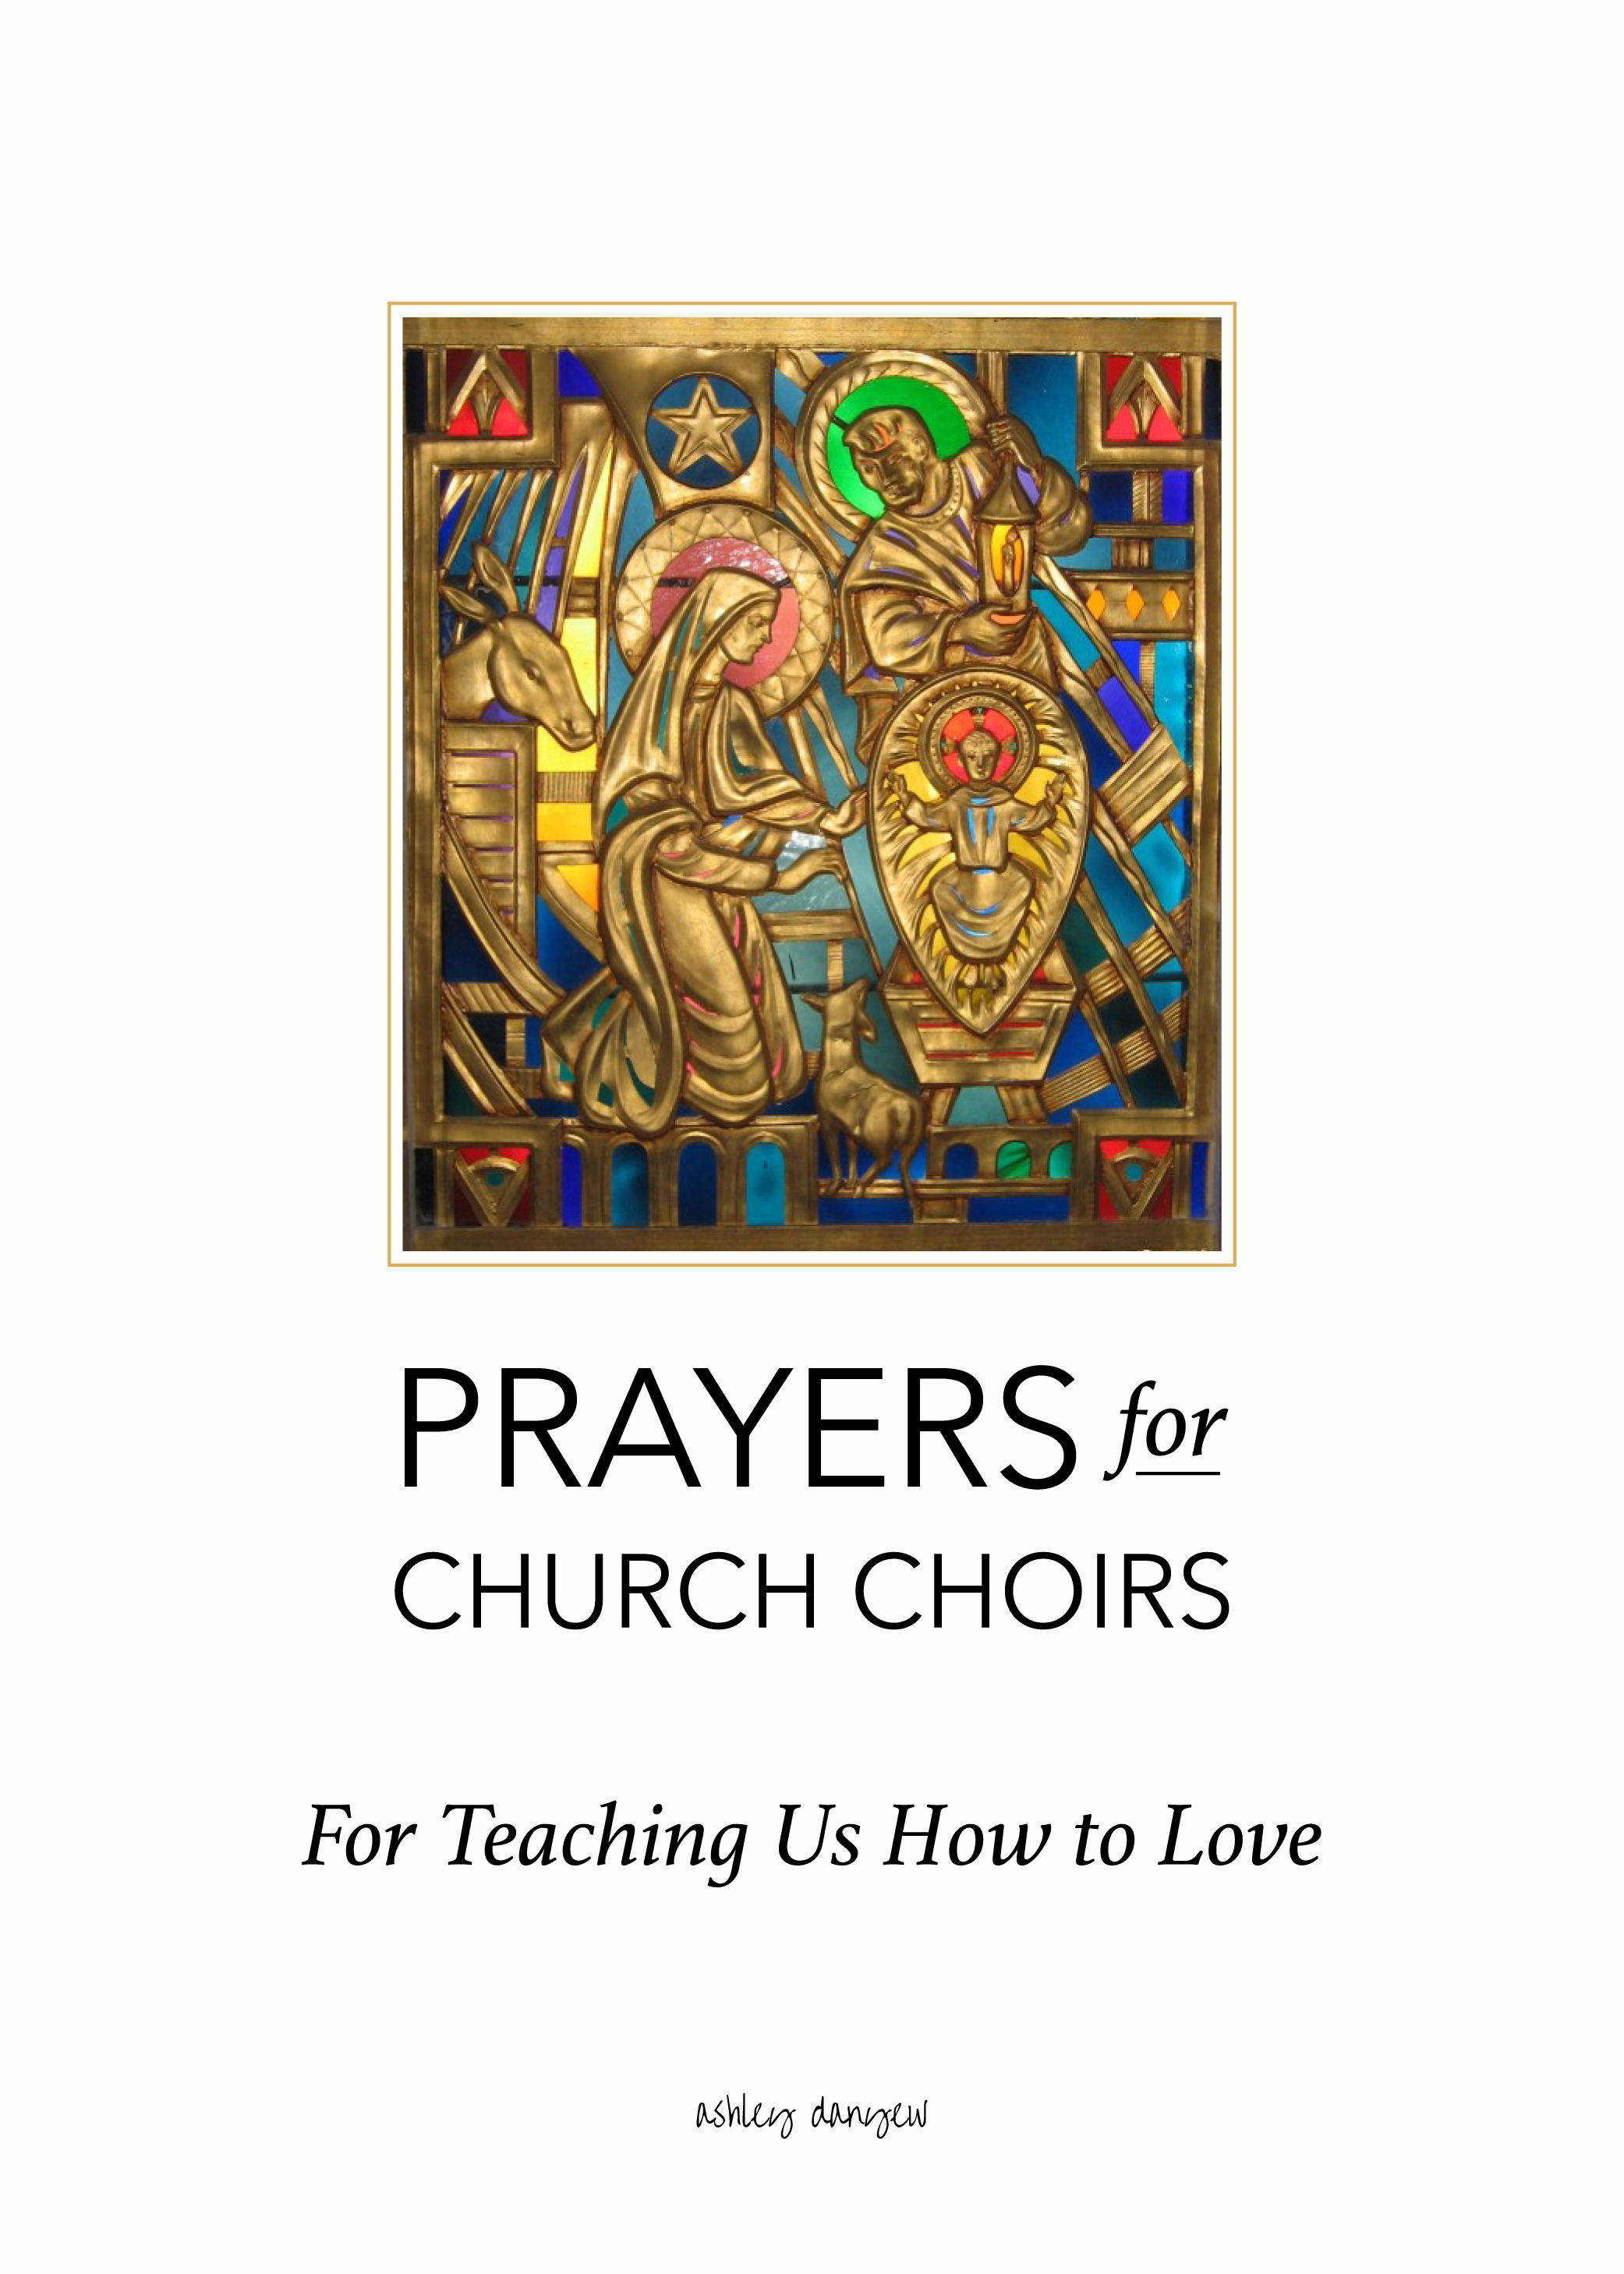 Copy of Prayers for Church Choirs: For Teaching Us How to Love